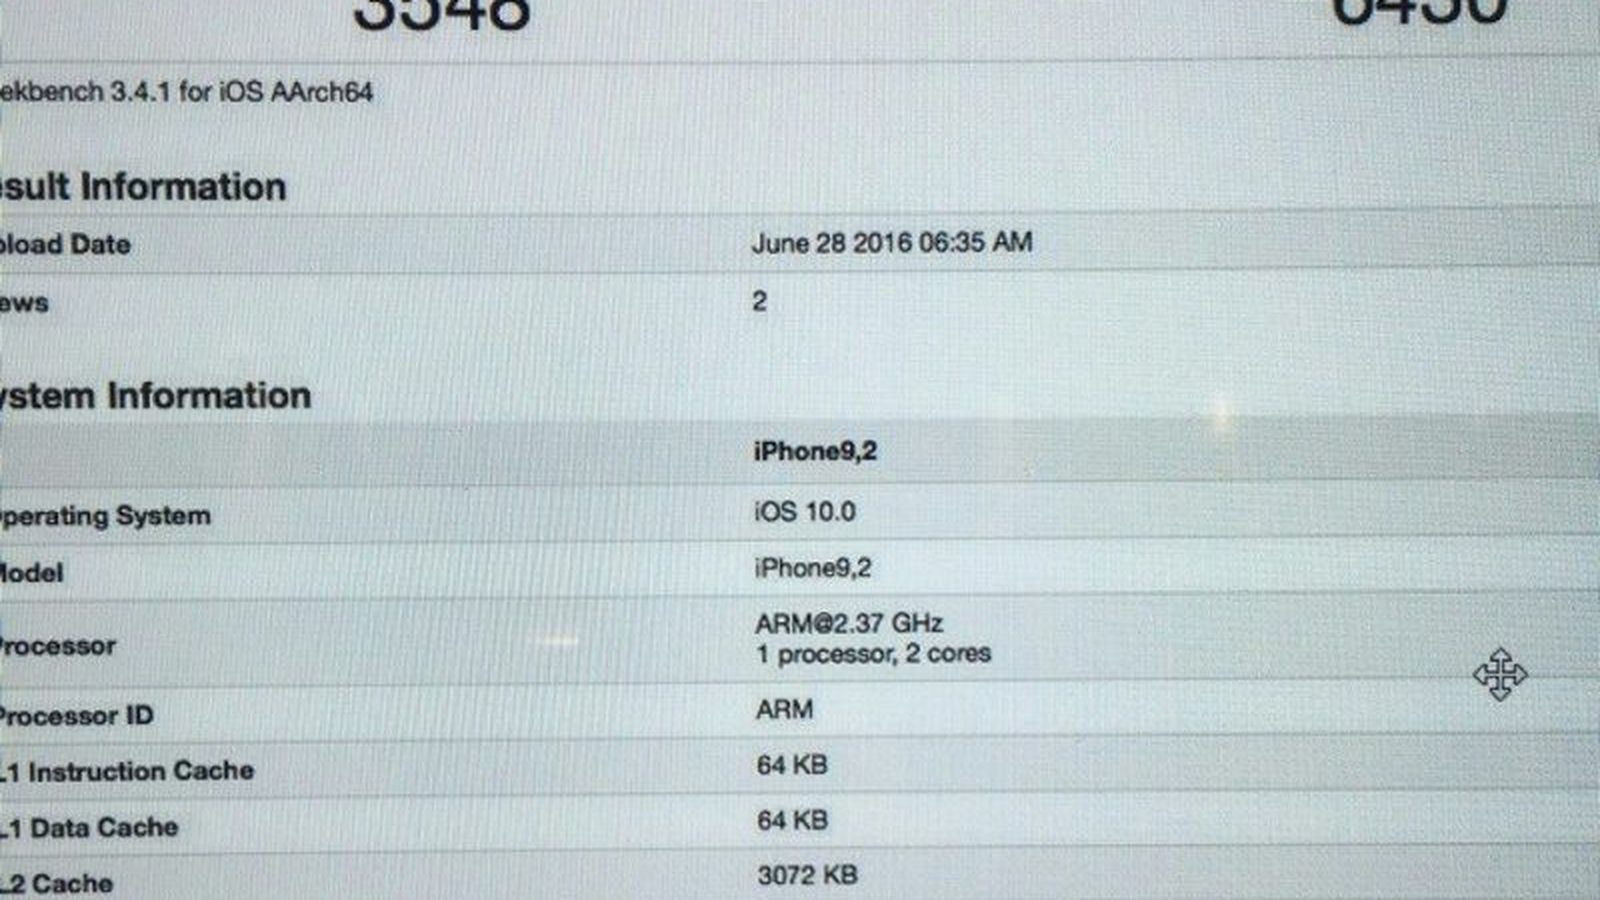 Alleged iPhone 7 Plus Geekbench Results Reveal 2.37 GHz Dual-Core